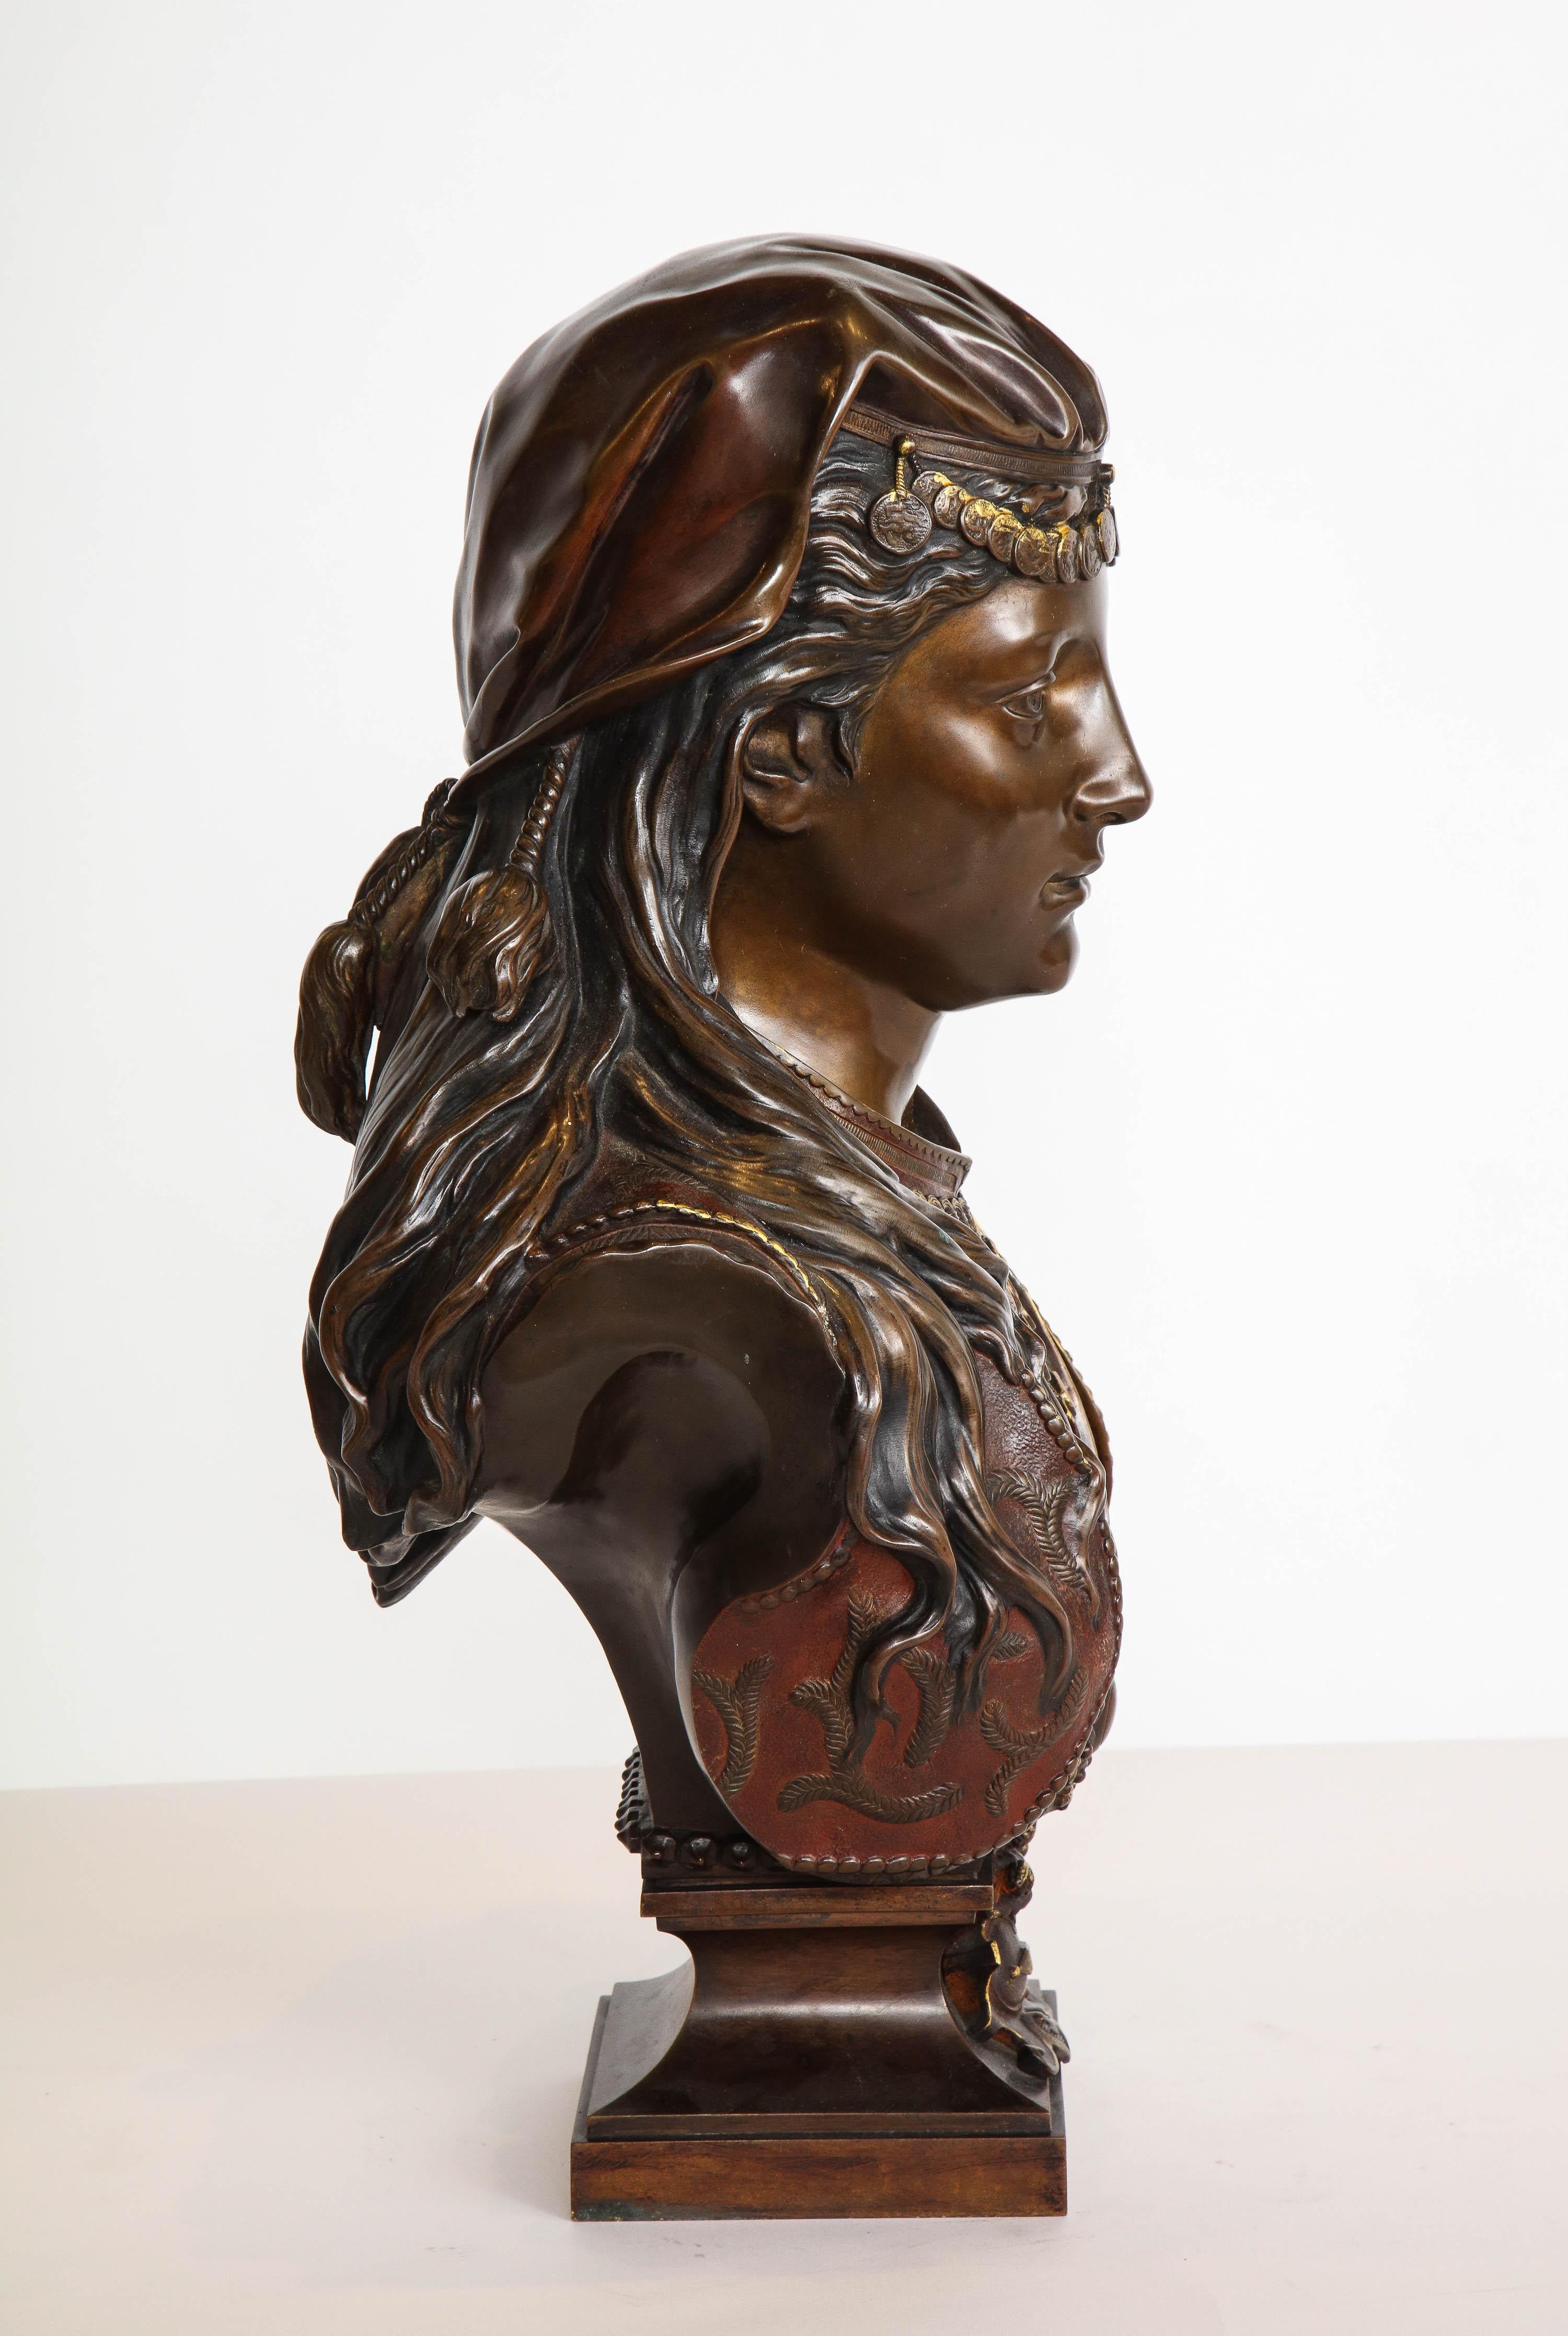 An Exquisite French Multi-Patinated Orientalist Bronze Bust of Beauty, by Rimbez - Gold Figurative Sculpture by Unknown